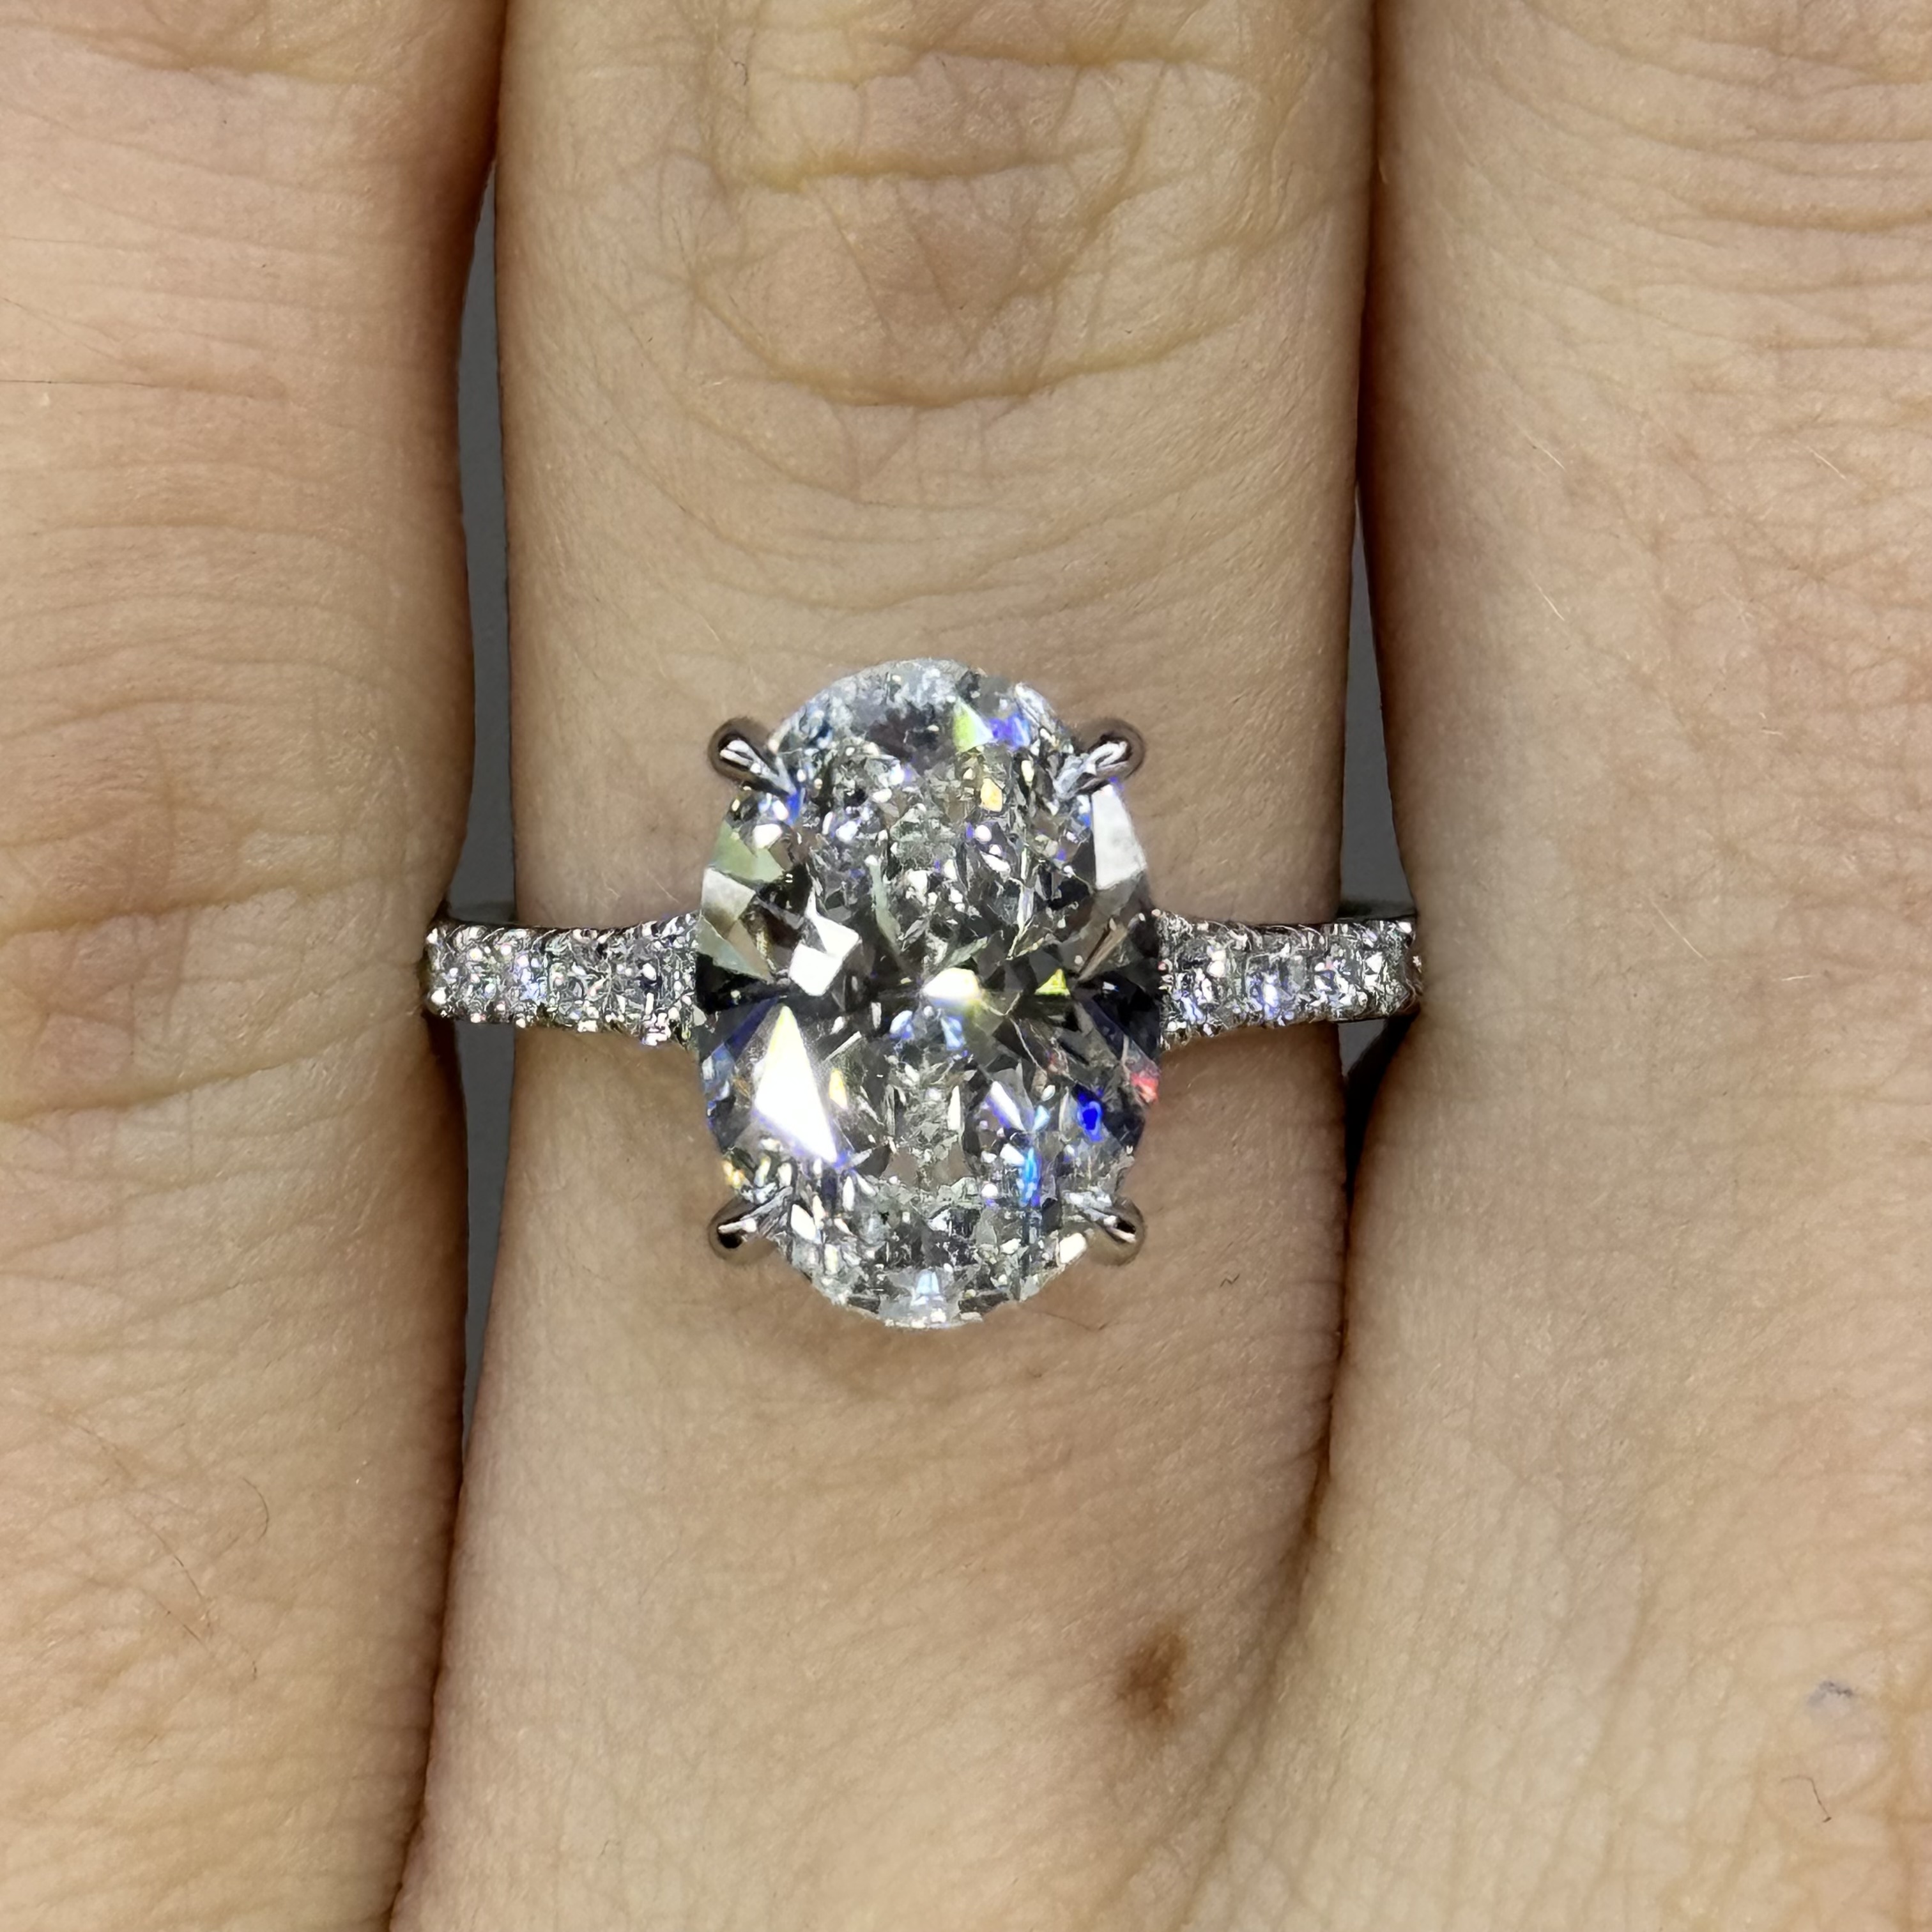 GIA 3.42ct Oval E VS1 "Remy" Engagement Ring Image 2 Forever Diamonds New York, NY